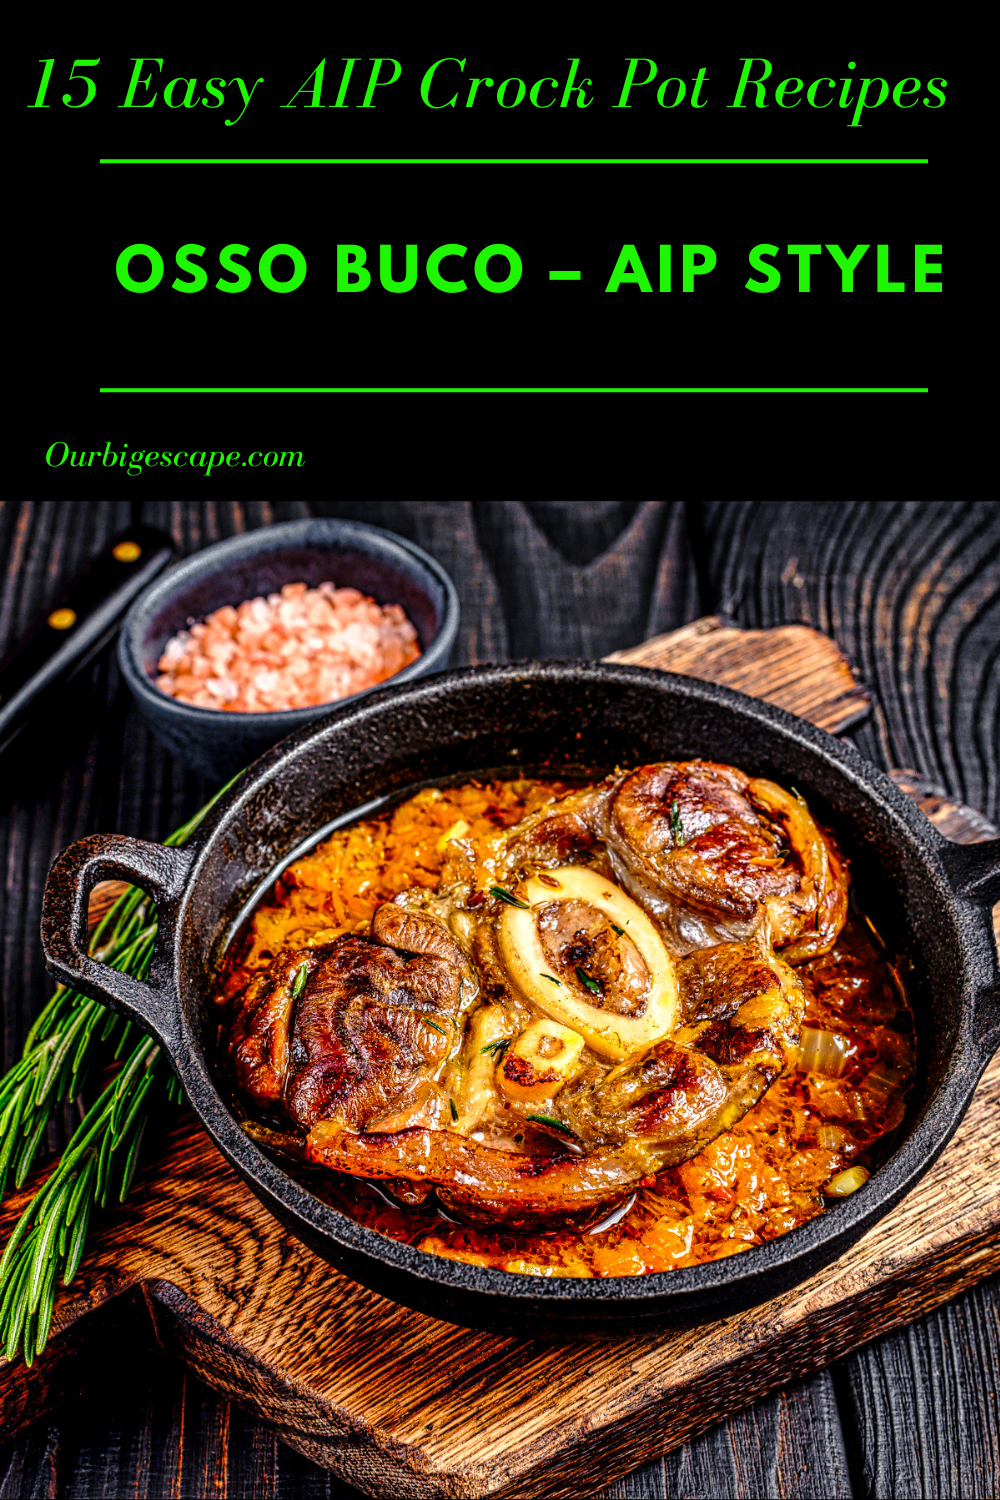 3. Osso Buco – AIP Style (1) - AIP crock pot recipes